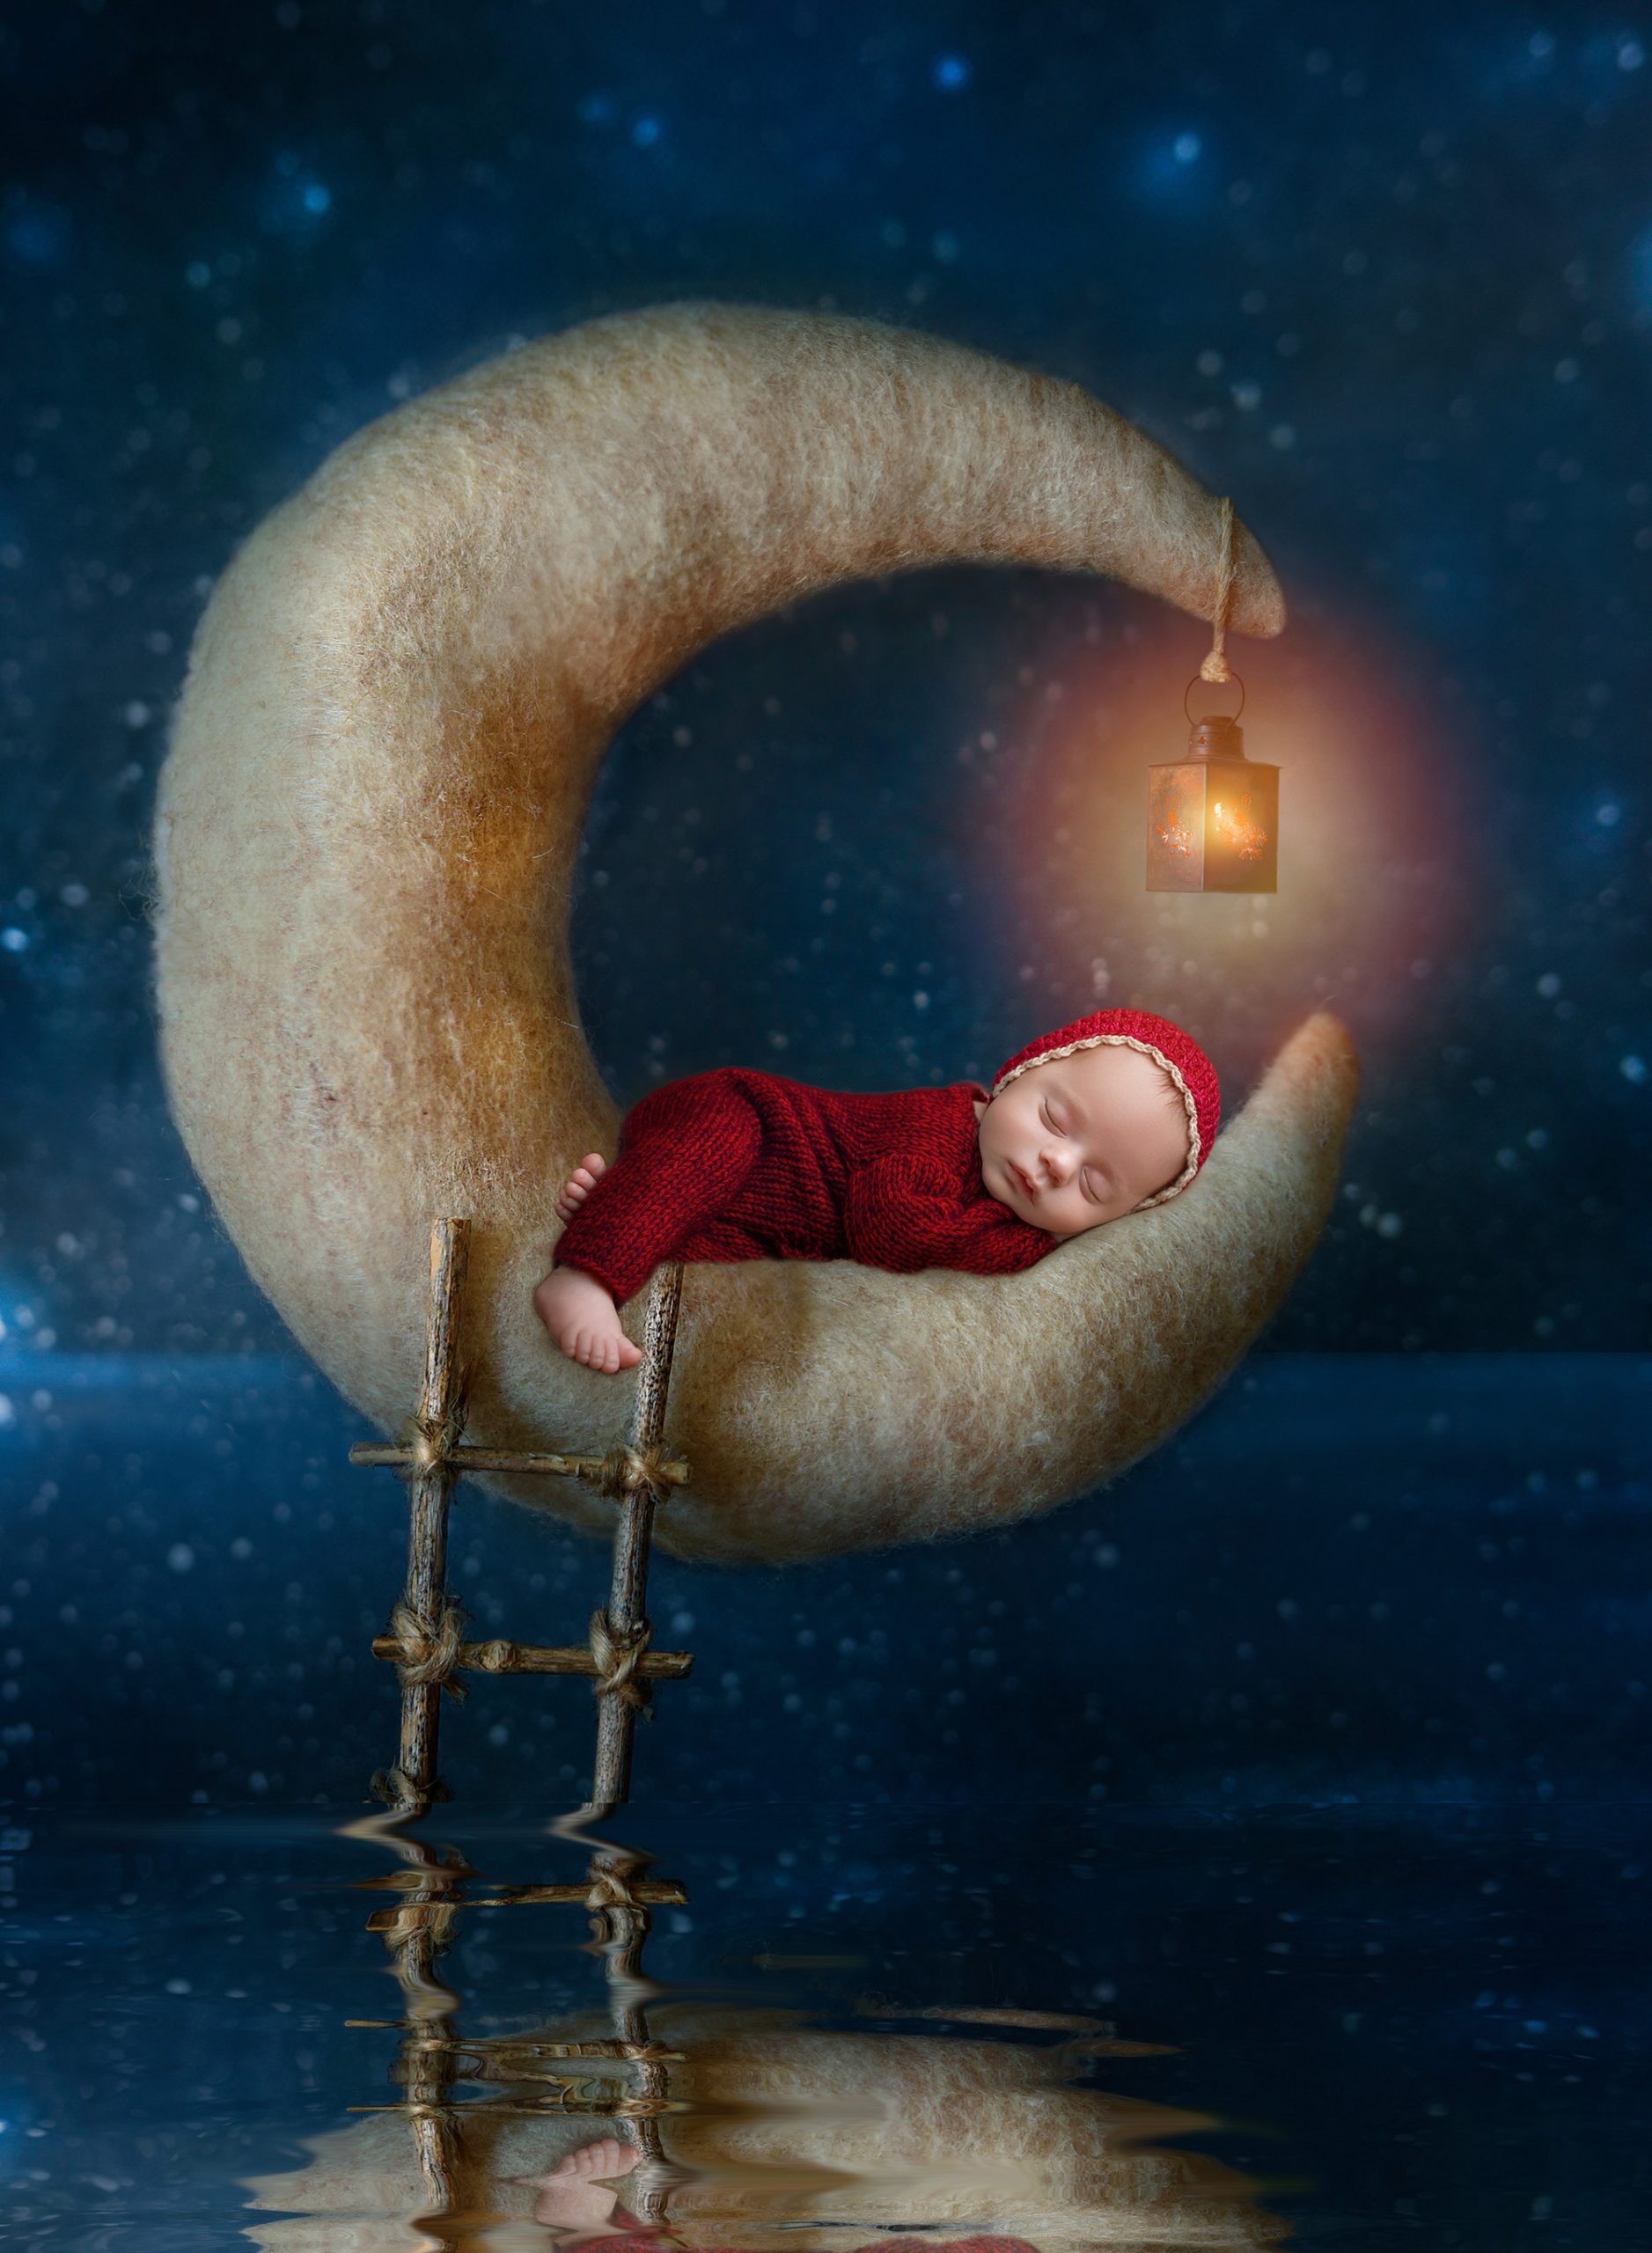 award winning newborn photography newborn baby boy dressed in red asleep on a crescent moon shadowing the water on a starry background